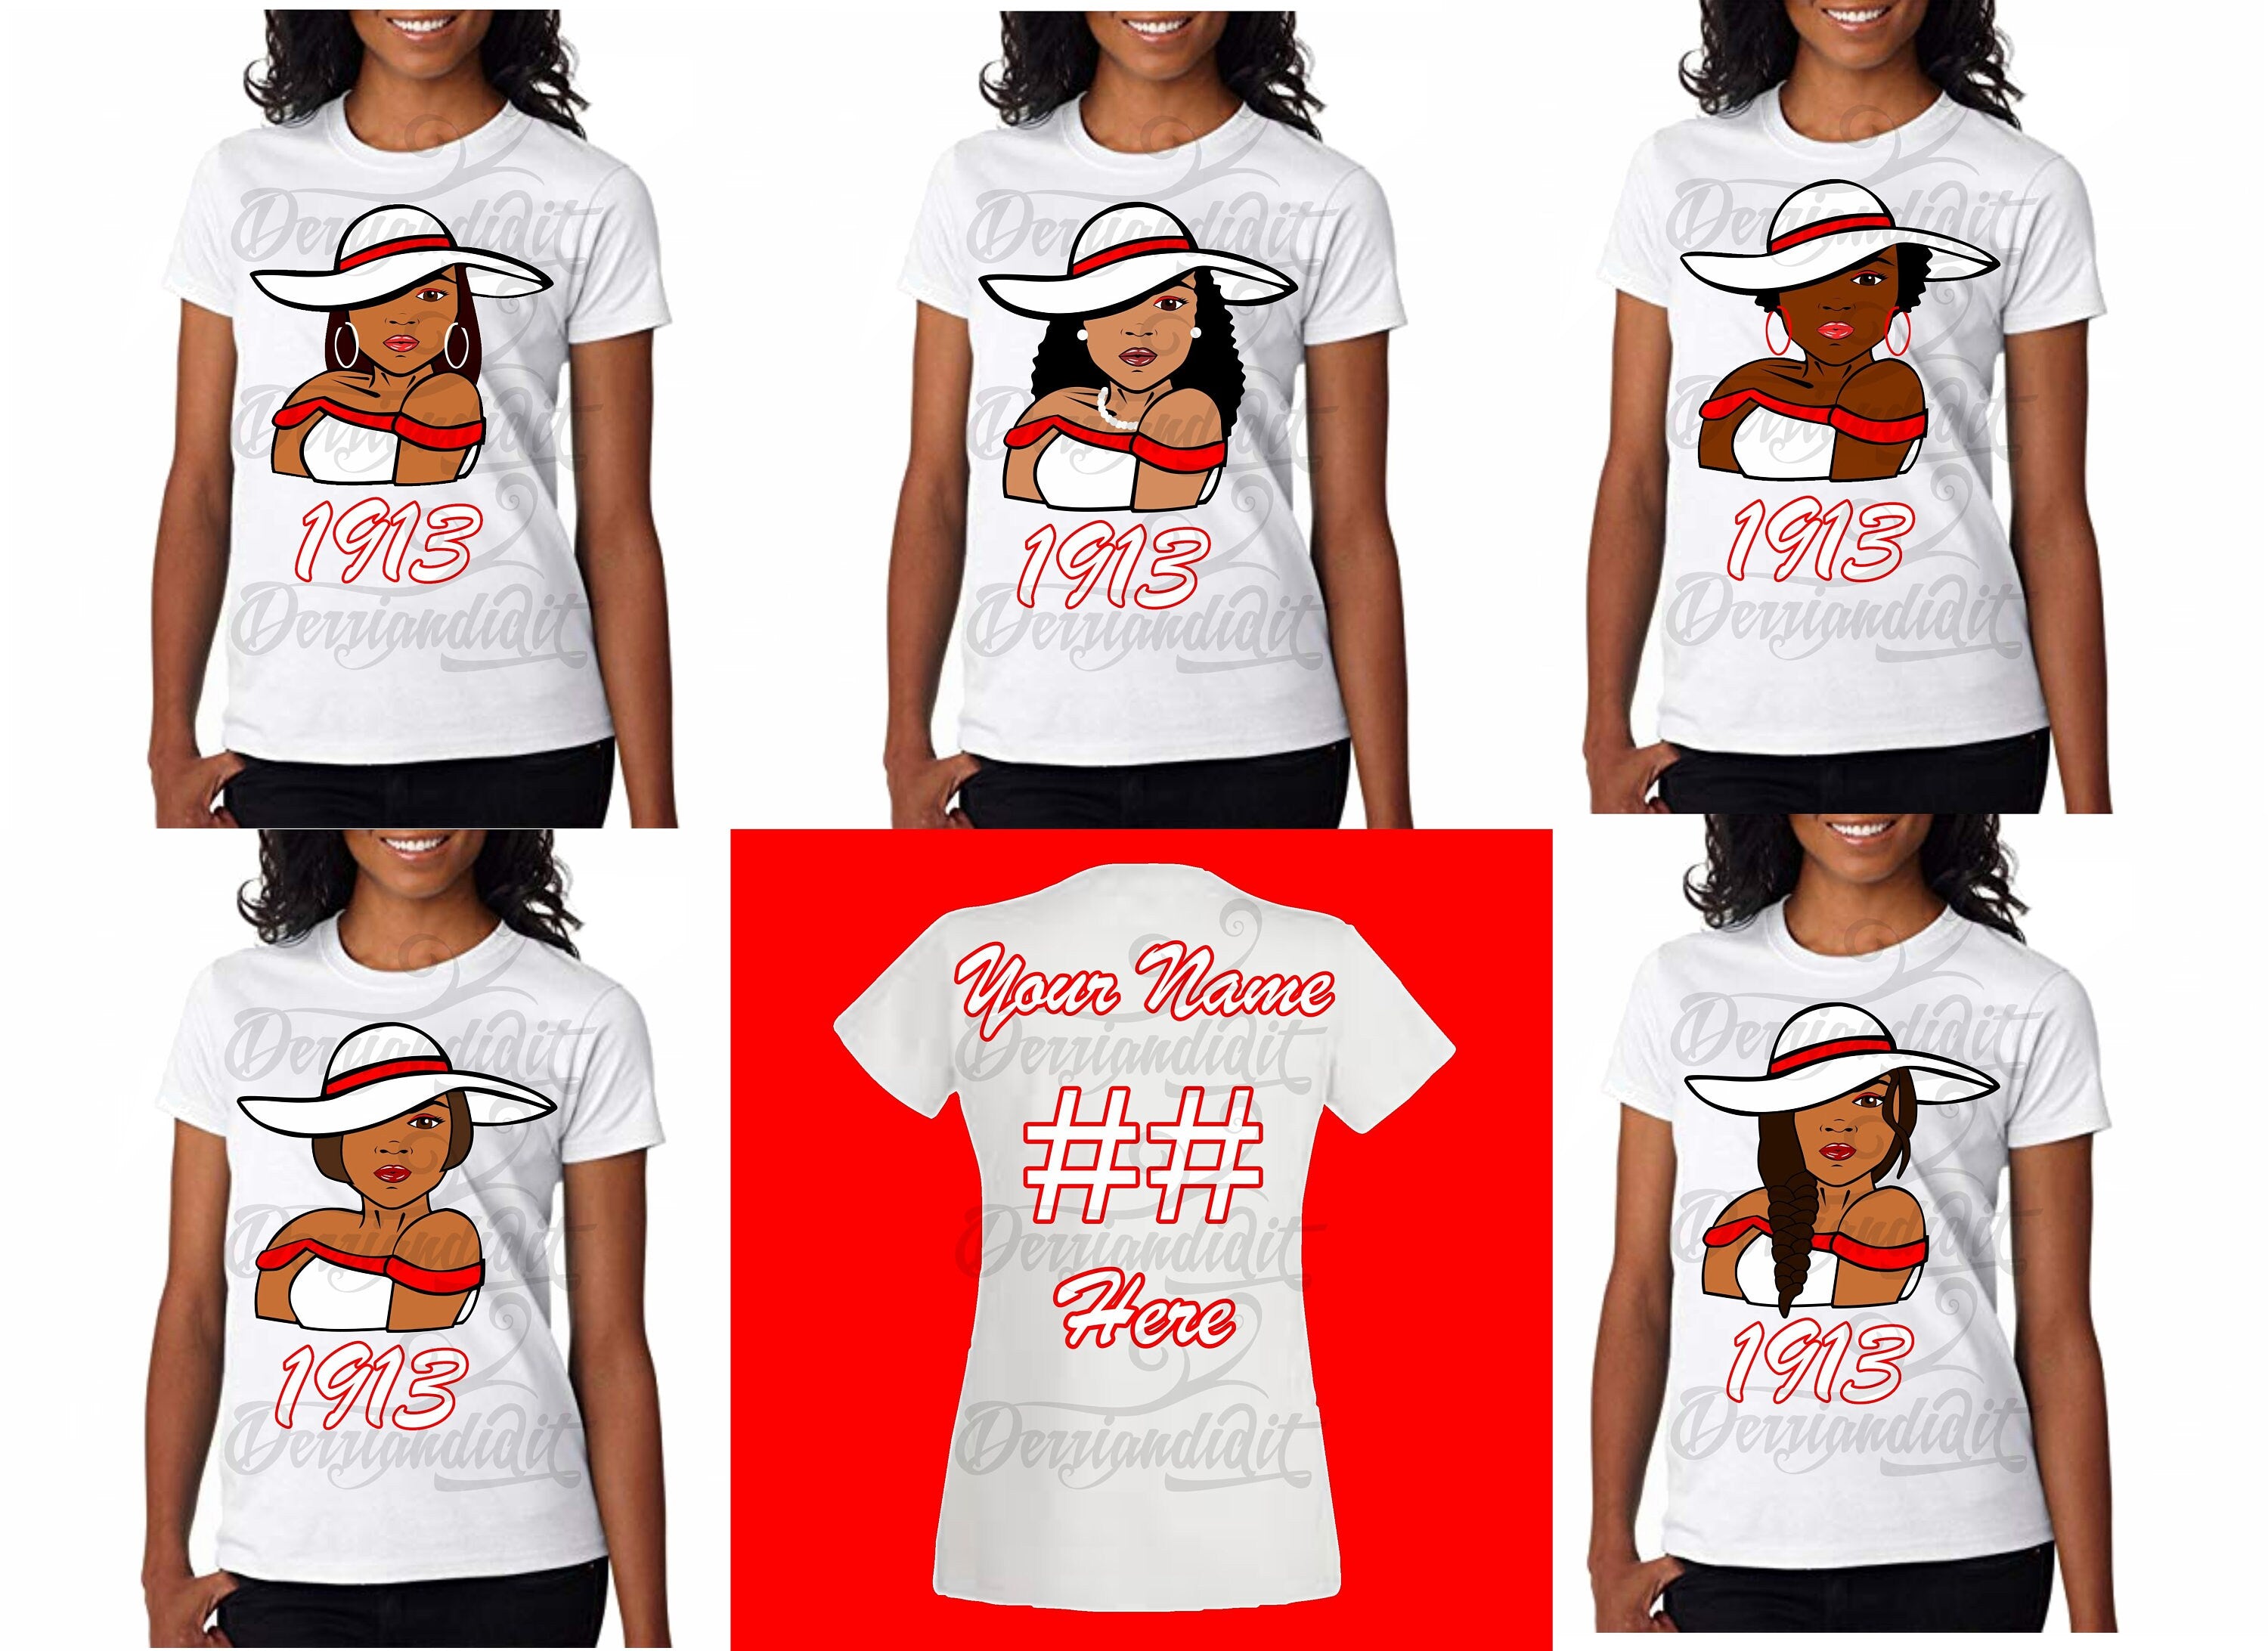 Custom T-Shirt 1913/Pick Your Style/ Pick Your Theme/ Line Shirts / Free Shipping